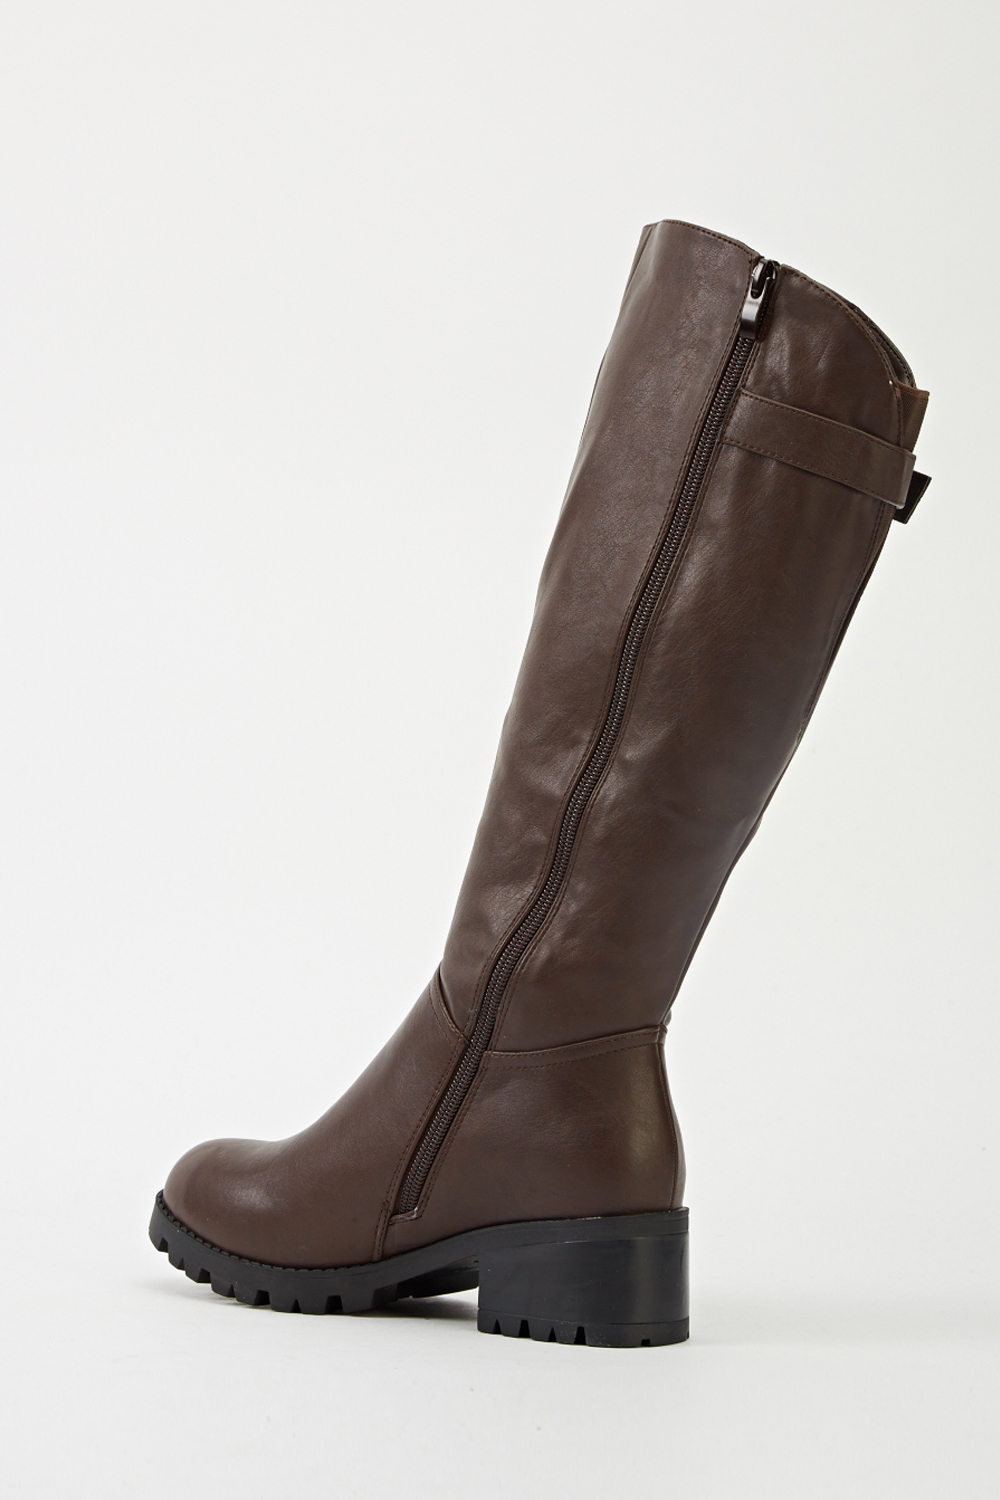 Brown Faux Leather Buckle Knee High Boots - Just $7